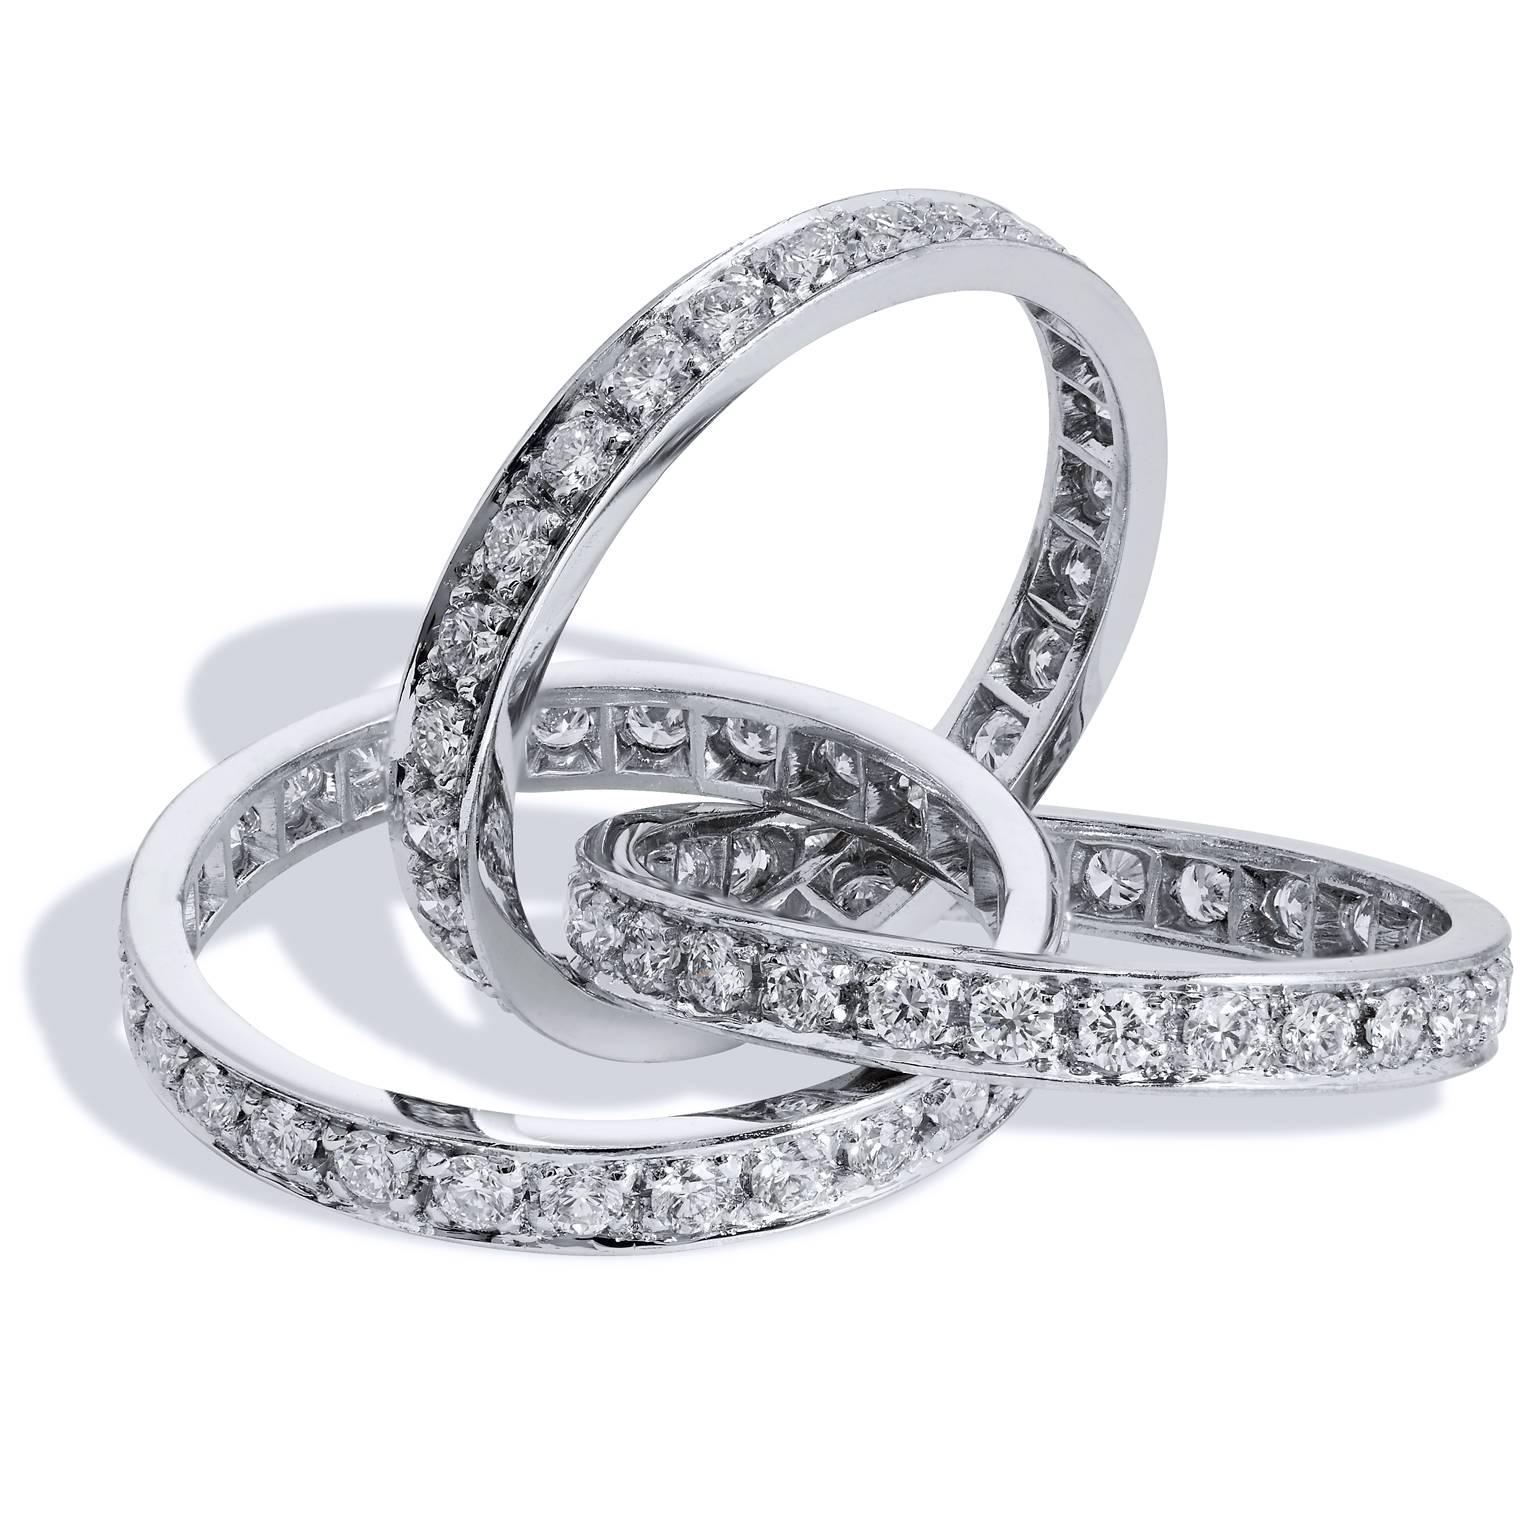 Pay tribute to the woman you love with this 18 karat white palladium and diamond triple roll ring. 2.90 carats of diamonds  (F/G/VS1), pave set, are suspended in a stunning three band arrangement. Each band falls gracefully and evokes the promise of